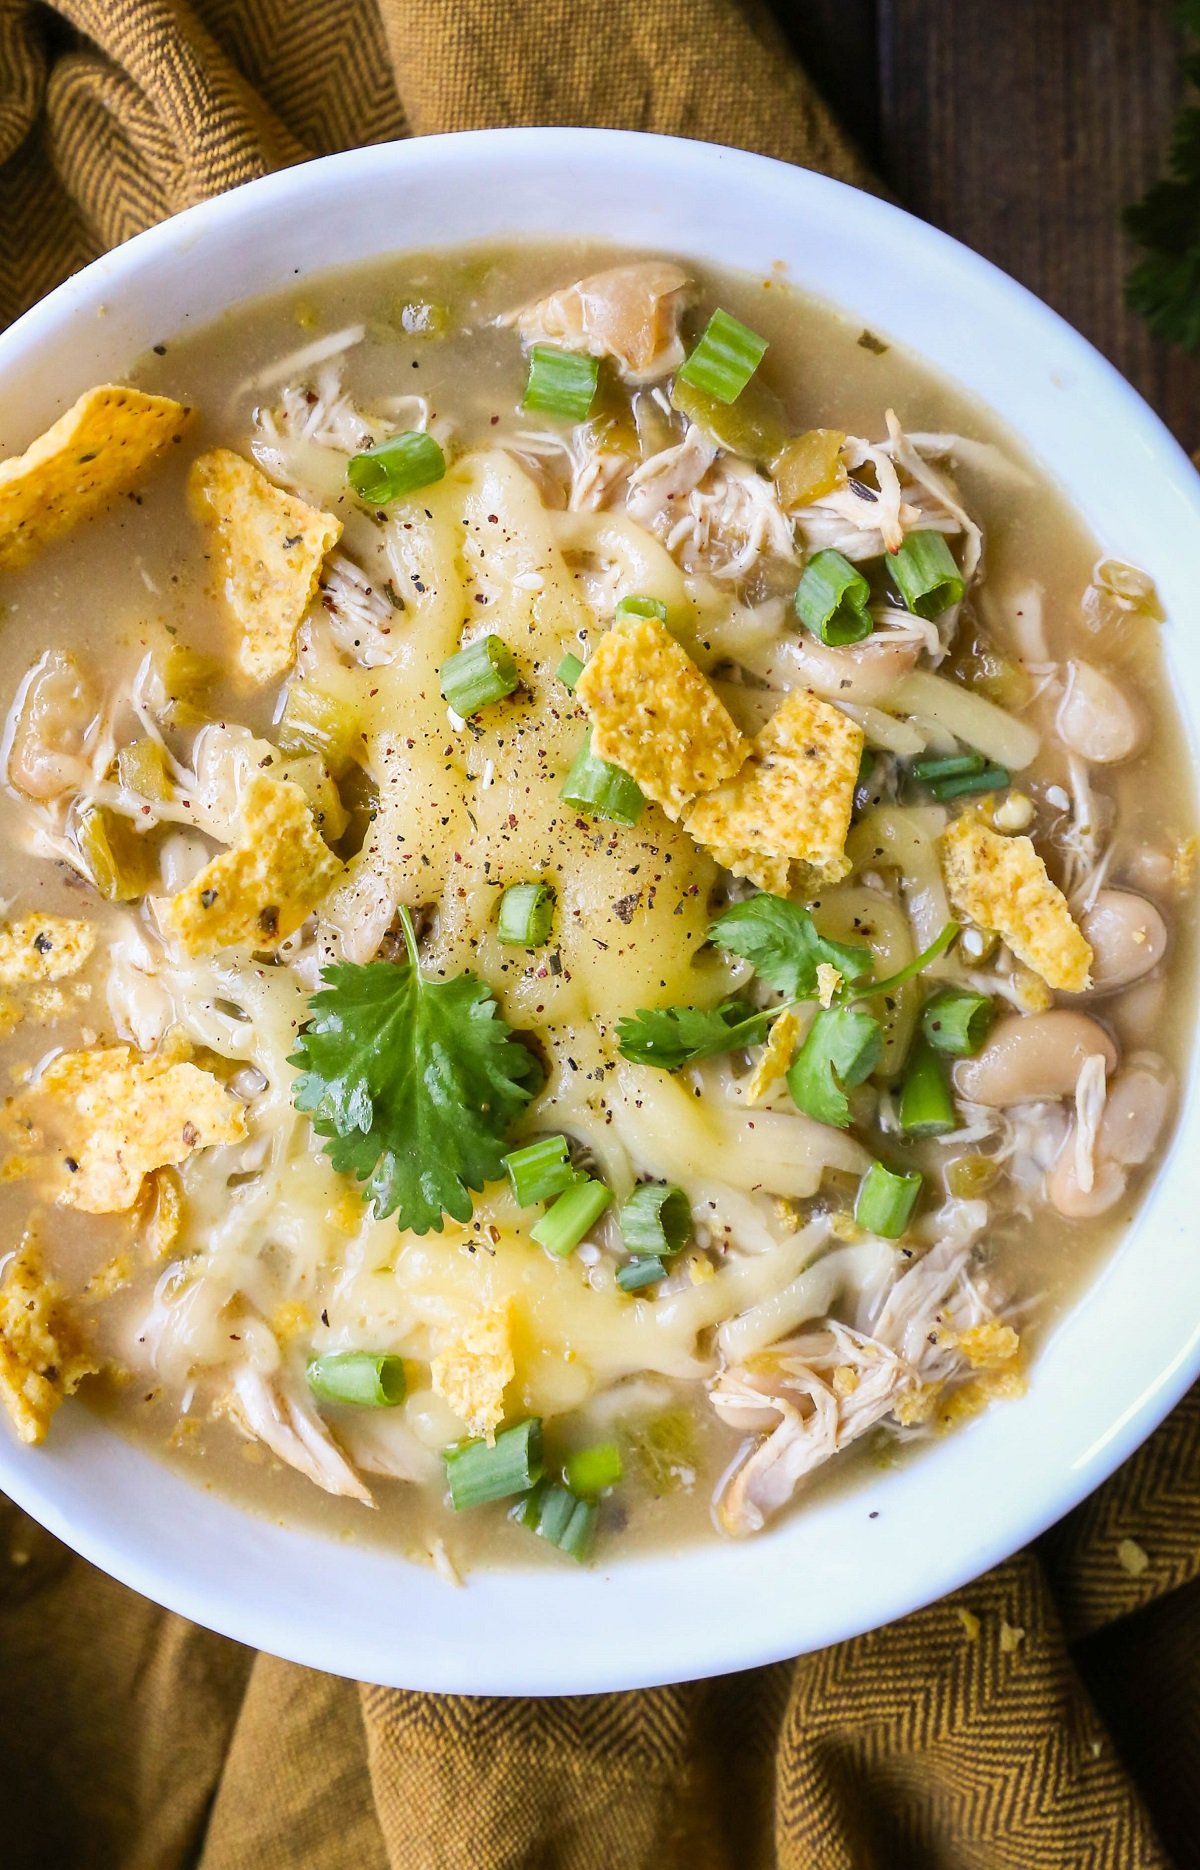 Large white bowl of white chicken chili with cilantro, green onions, cheese and tortilla chips on top.